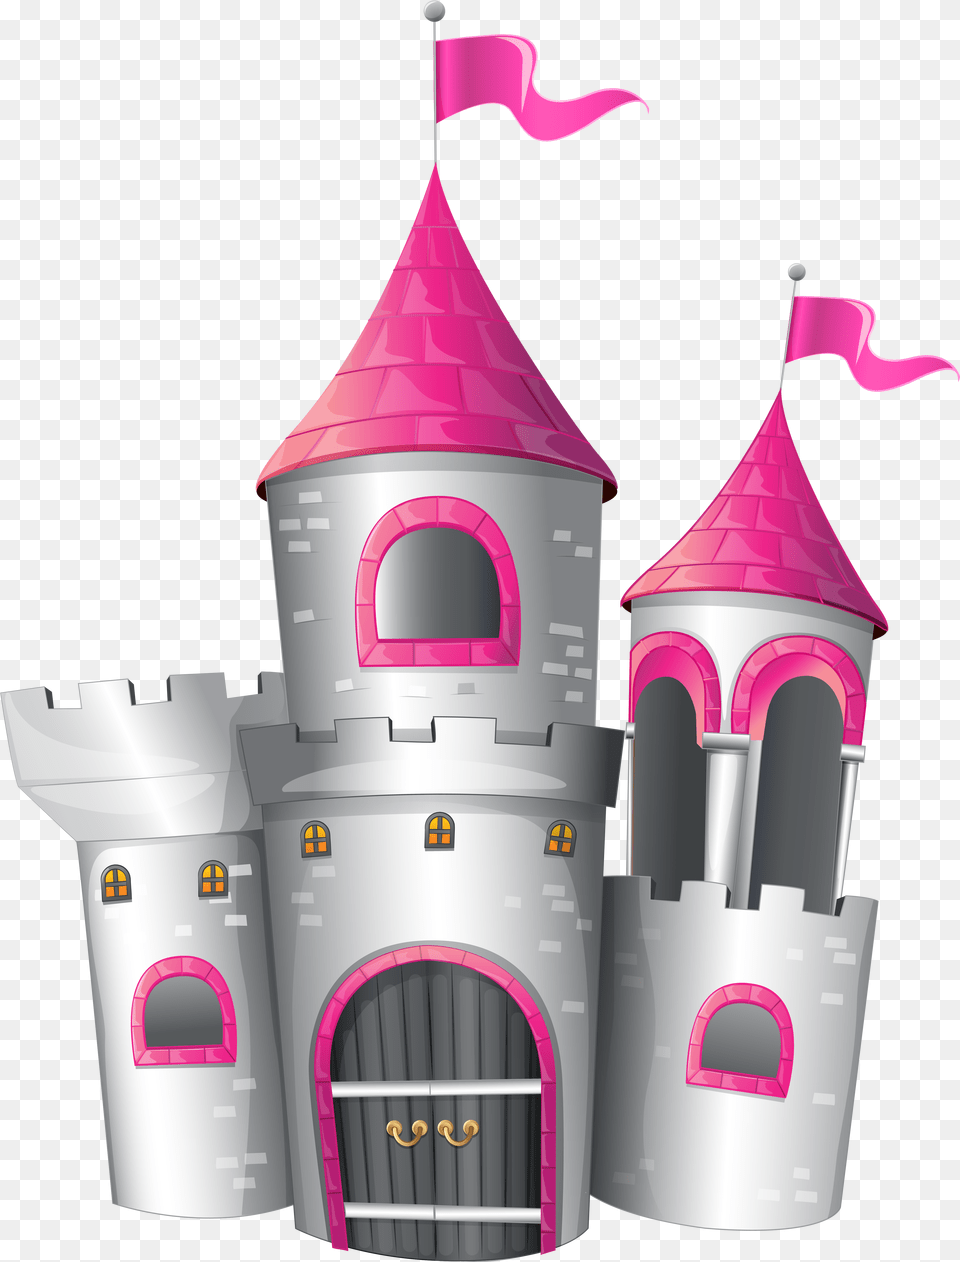 Tower Clipart Fortress Pink And White Castle, Architecture, Building, Spire Png Image